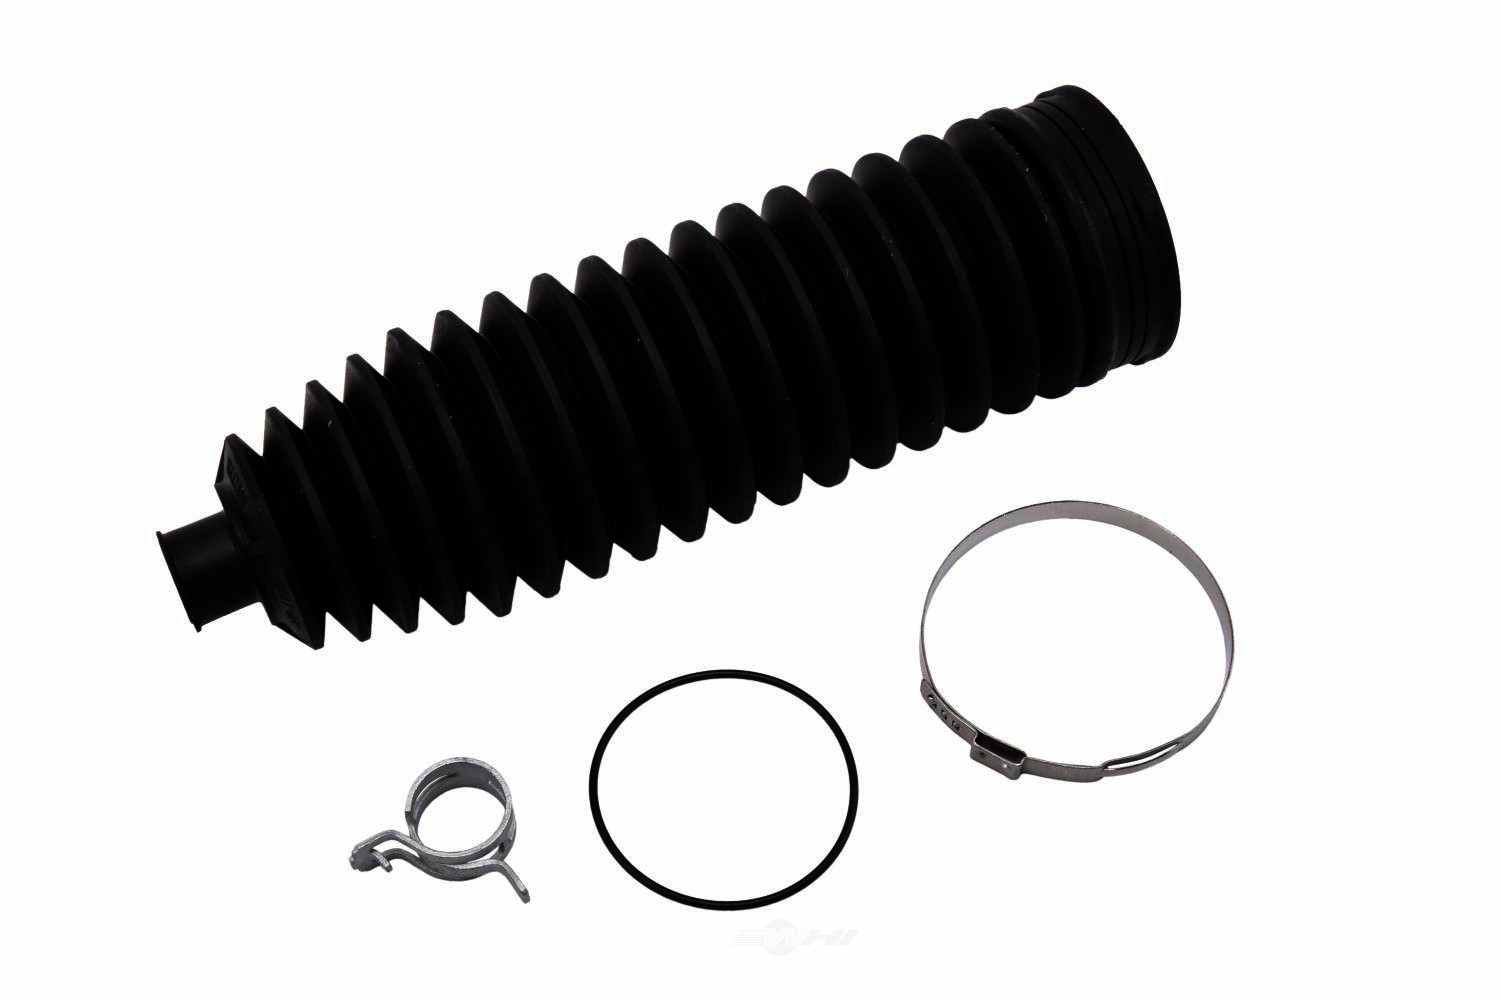 GM GENUINE PARTS - Rack and Pinion Bellows Kit - GMP 22776532